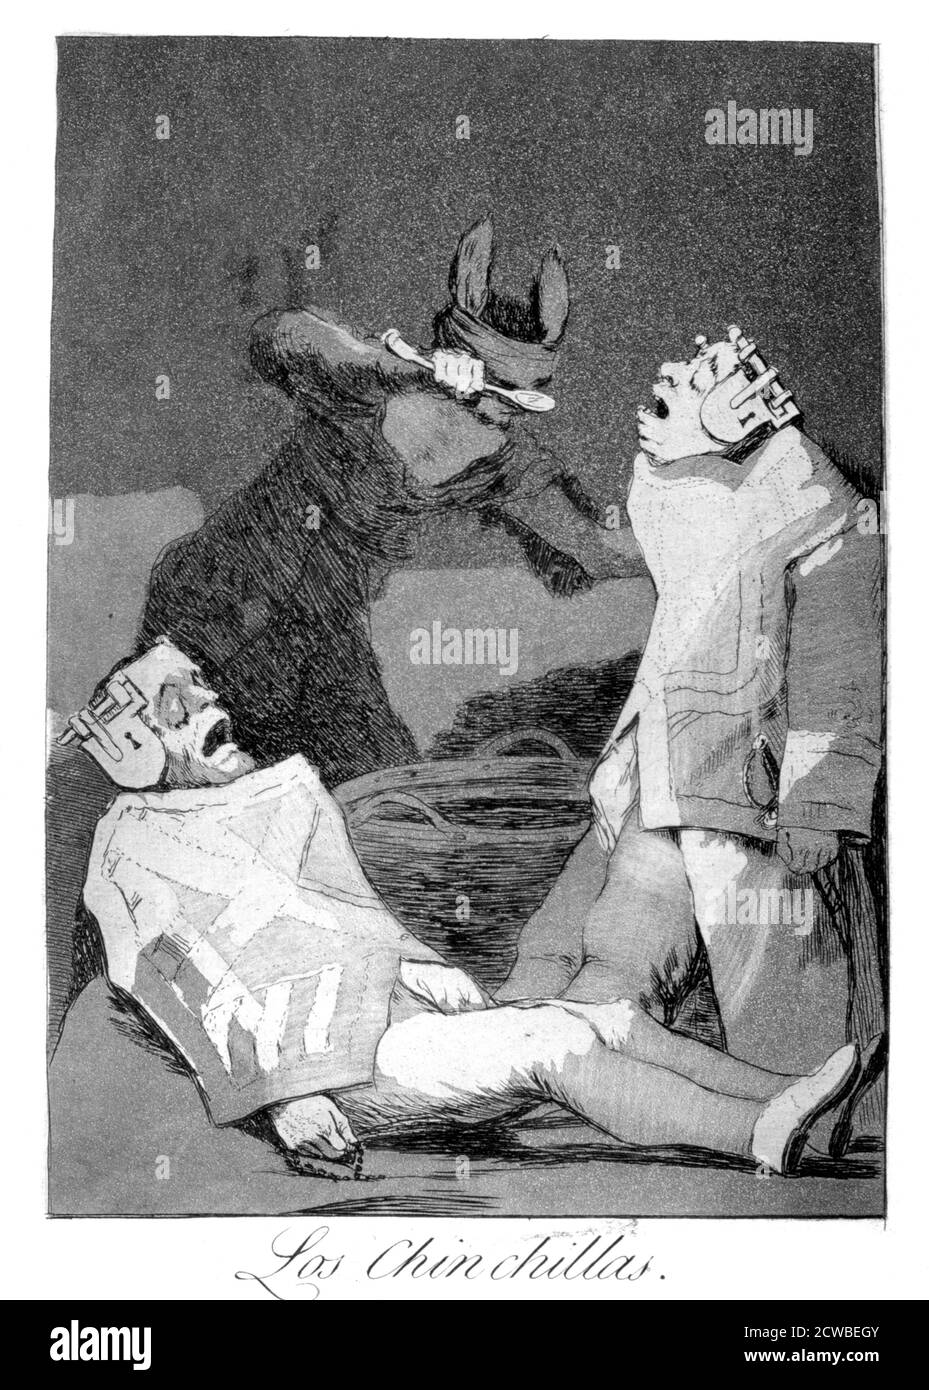 The Chinchillas', 1799 Artist: Francisco Goya. Plate 50 of 'Los Caprichos'. Los Caprichos are a set of 80 prints in aquatint and etching created by the Spanish artist Francisco Goya in 1797 and 1798, and published as an album in 1799. Stock Photo